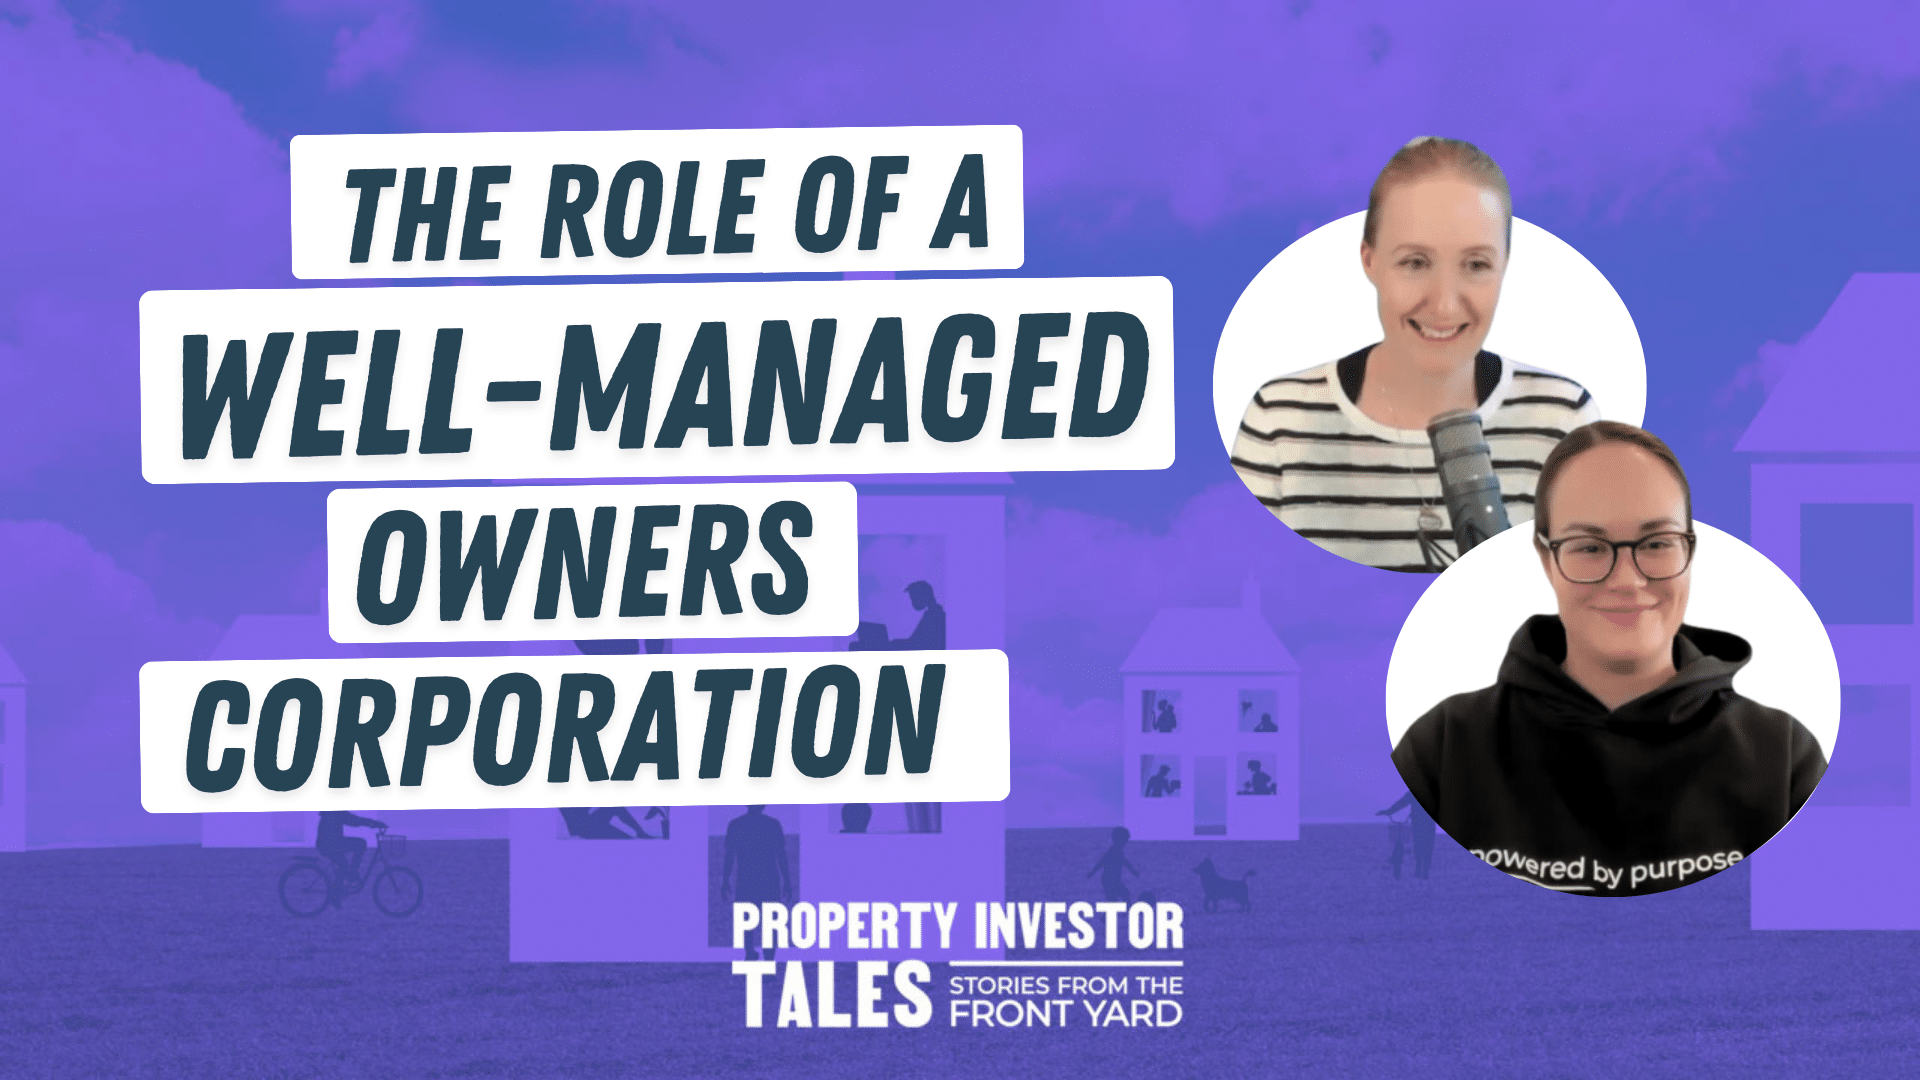 The Role of a Well-Managed Owners Corporation